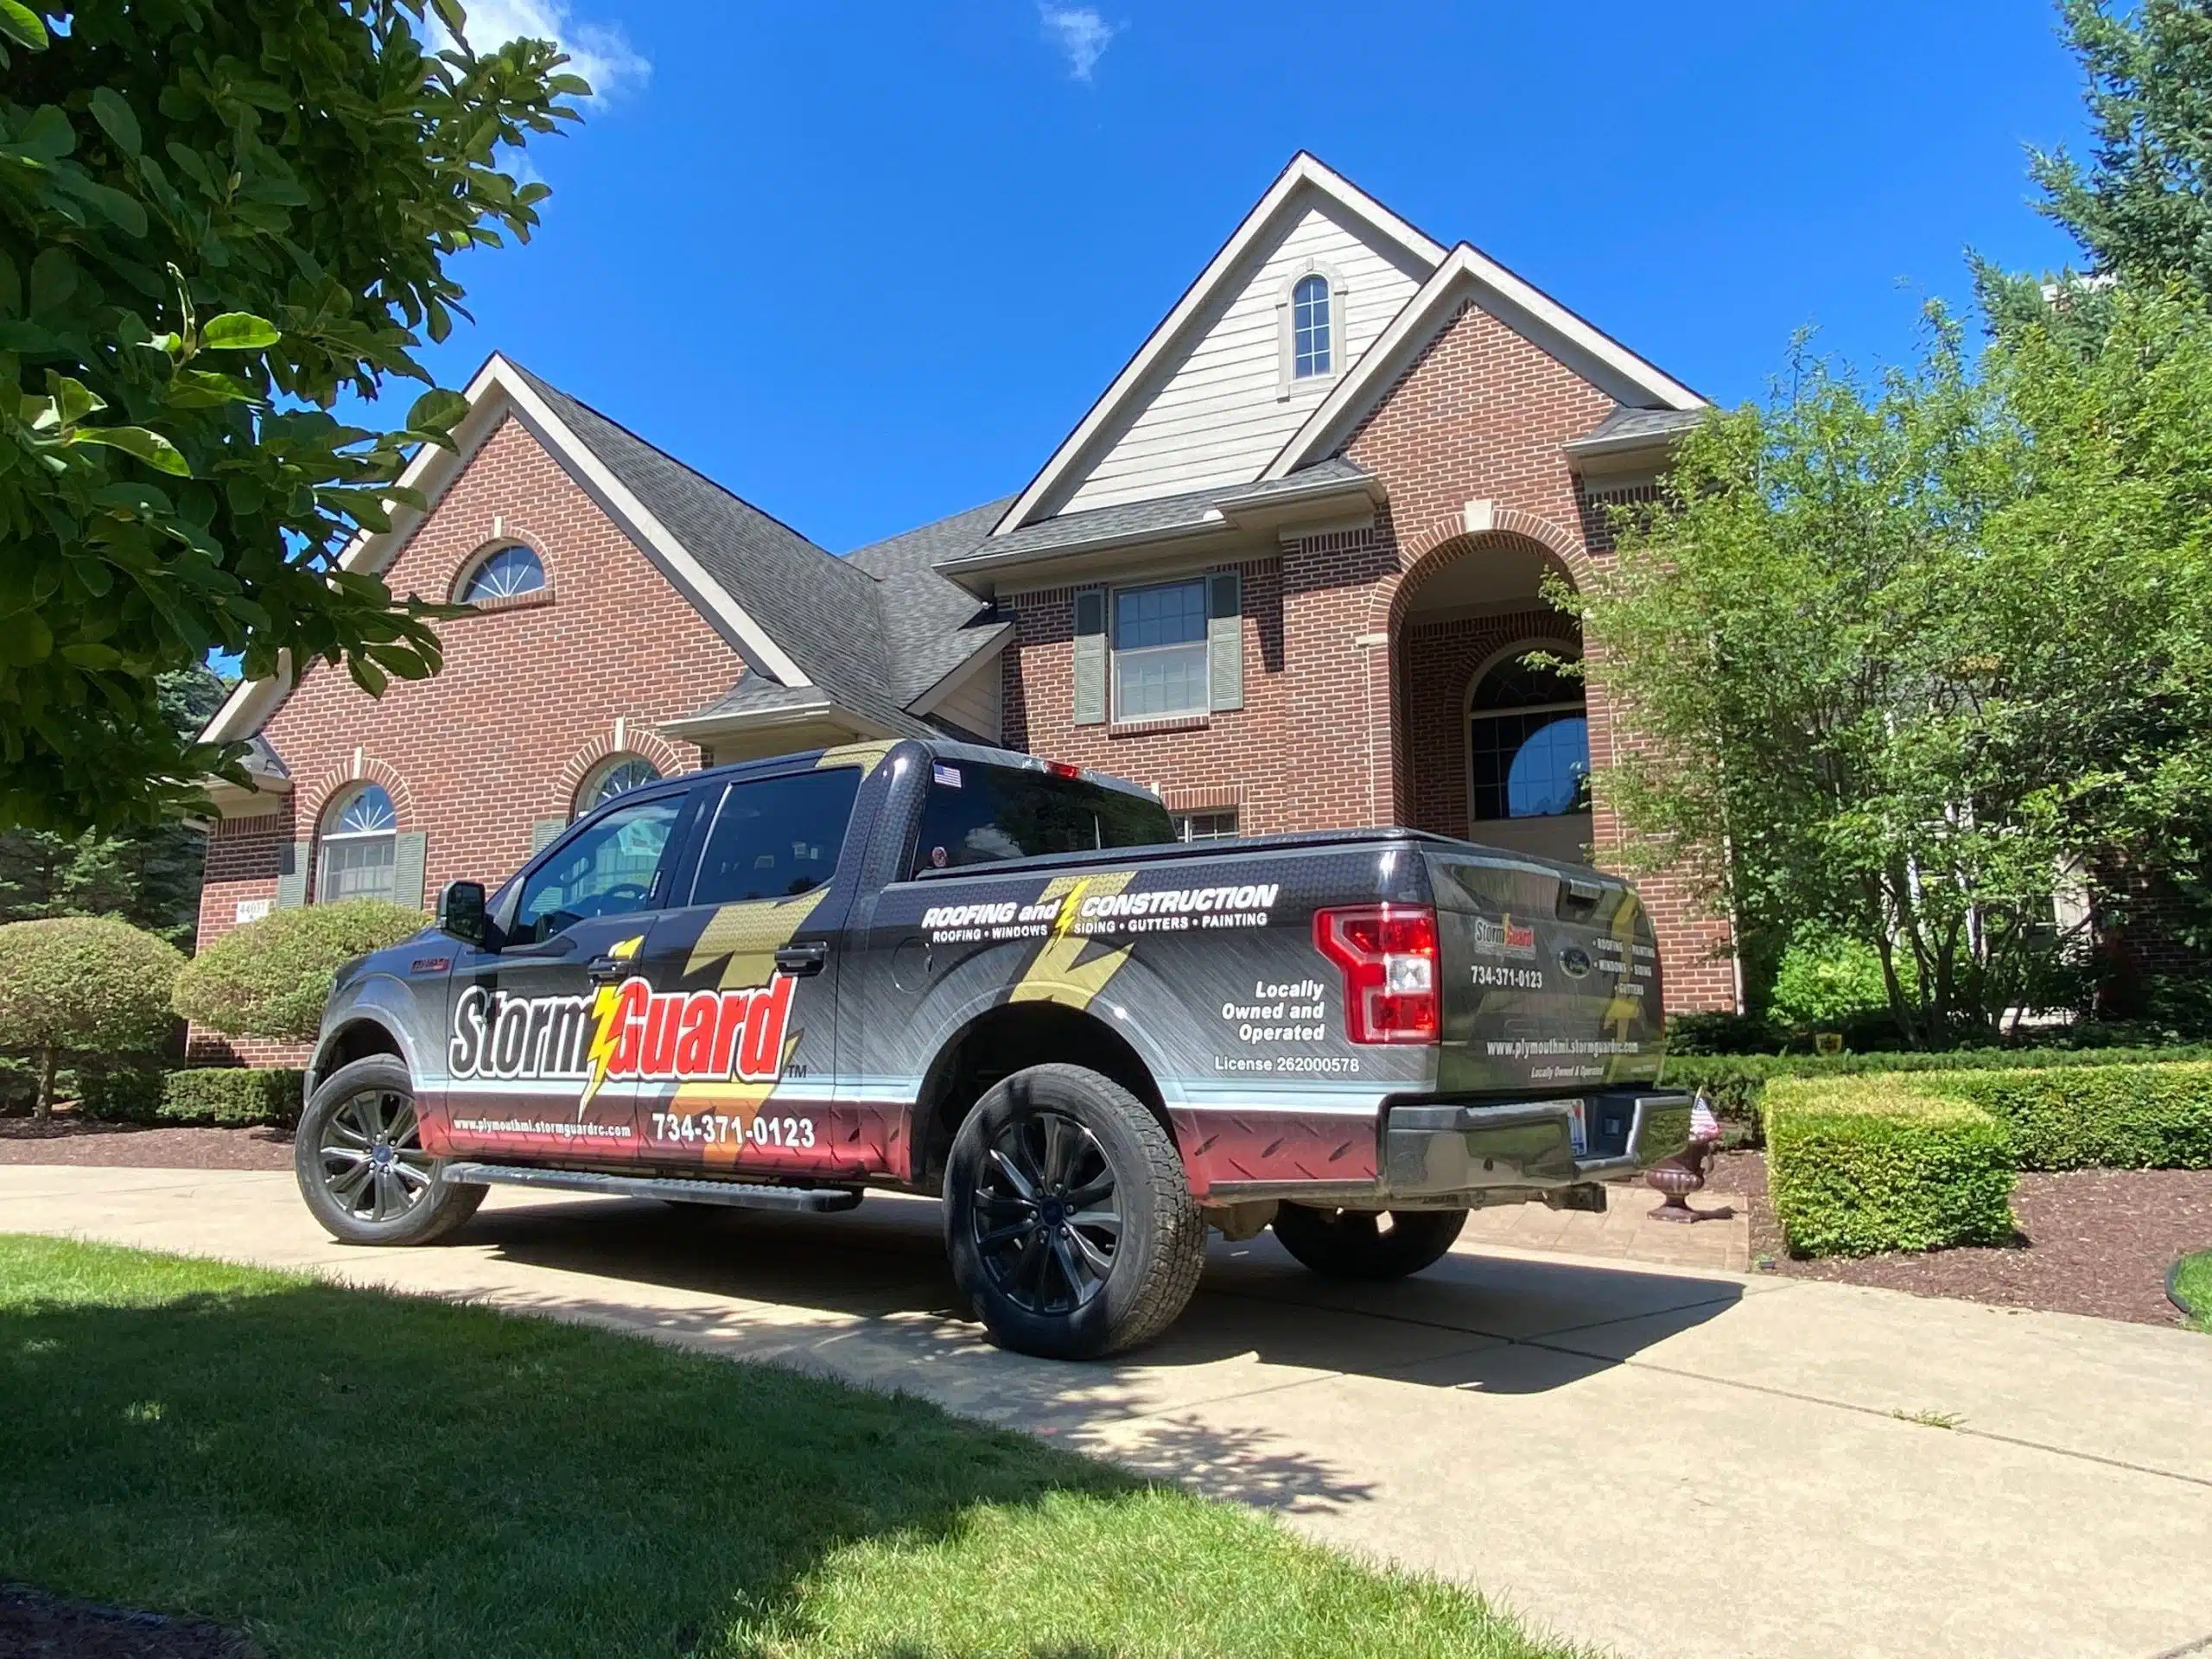 Brick House with Storm Guard Restoration Services Truck In Driveway - Plymouth